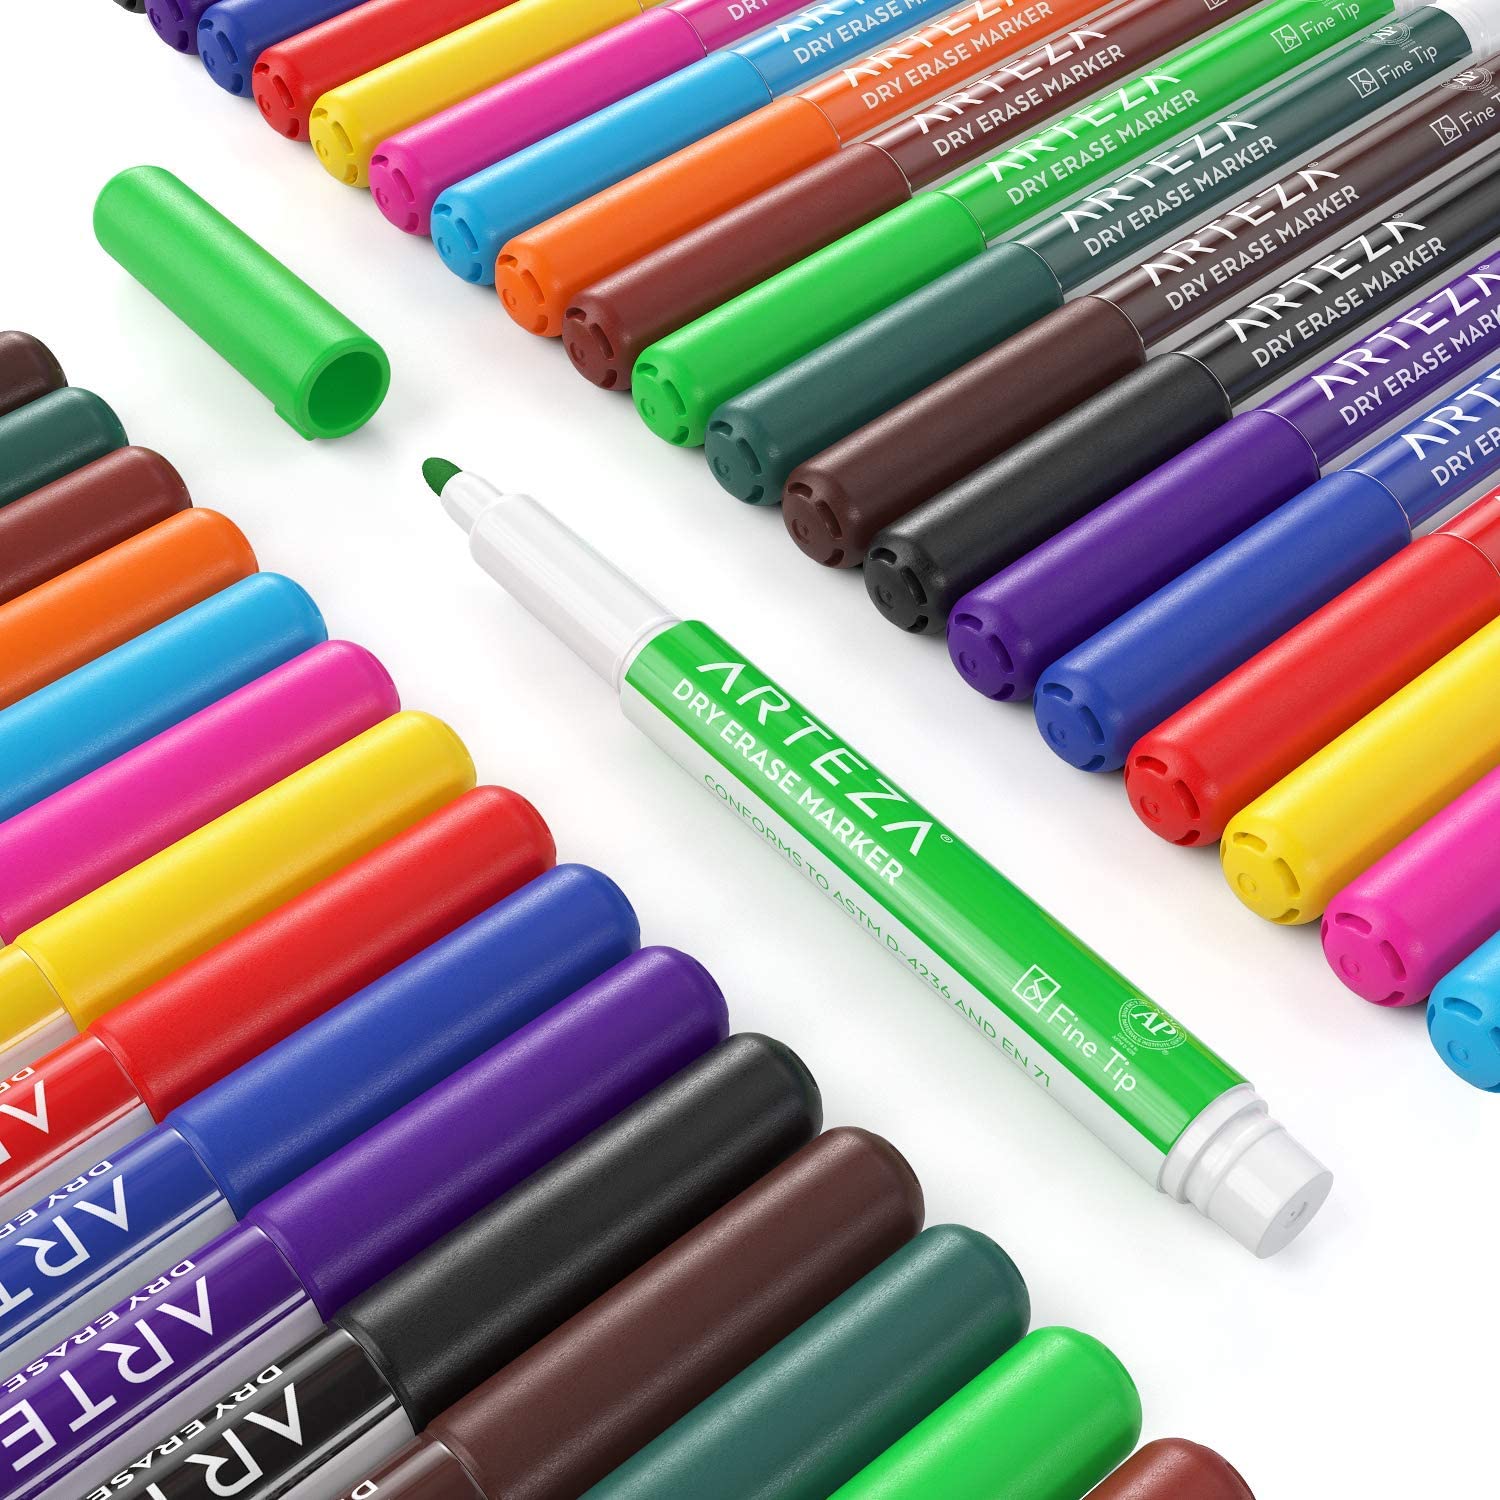 Dry Erase Markers, 12 Assorted Colors, Fine Tip - Set of 36